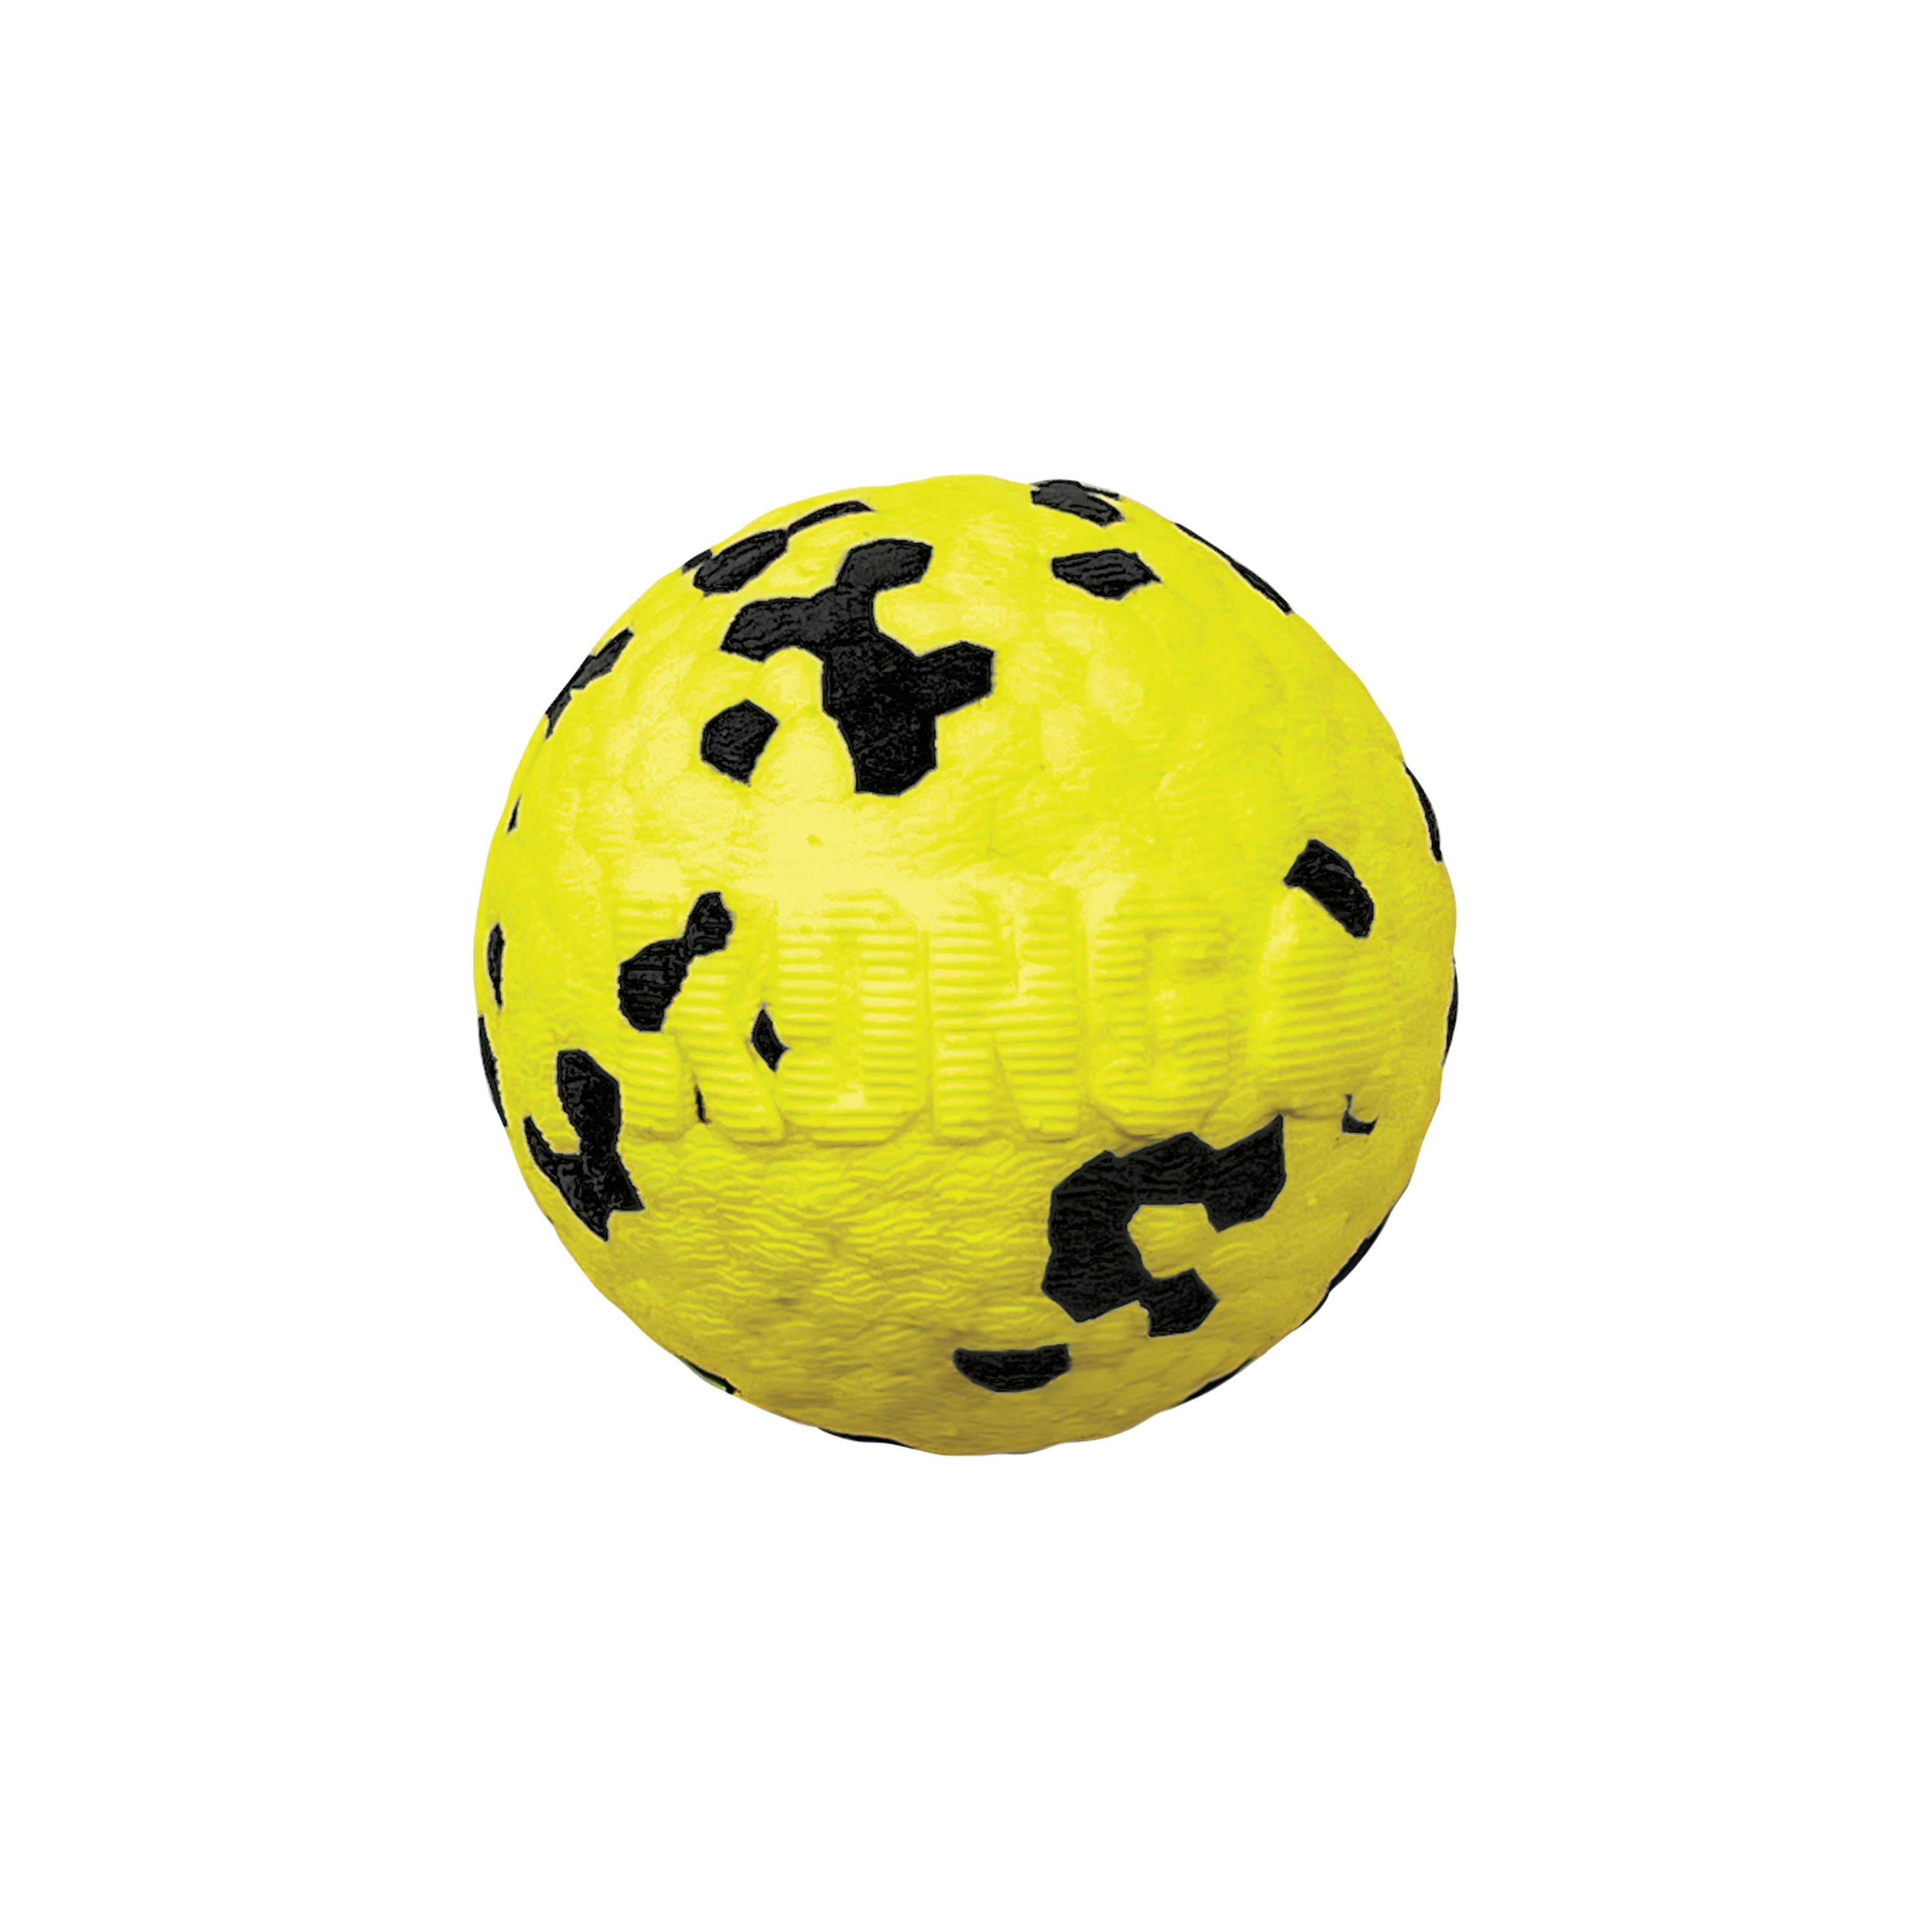 Reflex Ball offpack product image